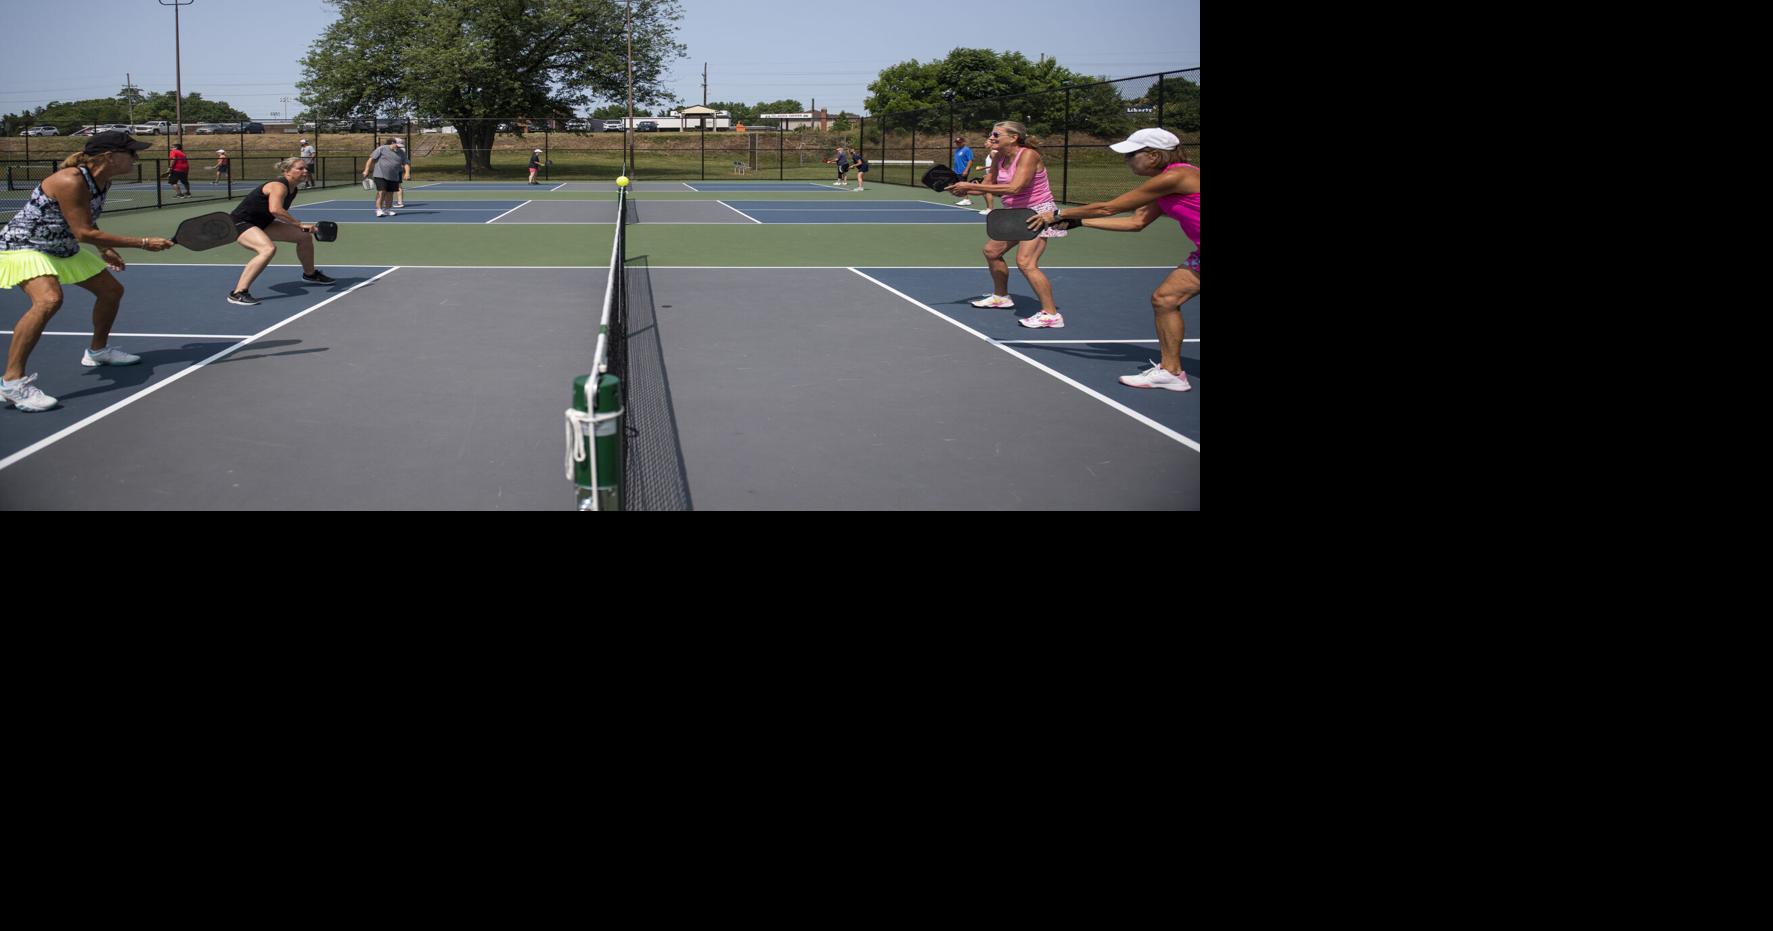 Push for more pickleball courts in Frederick has critics, too | Health ...